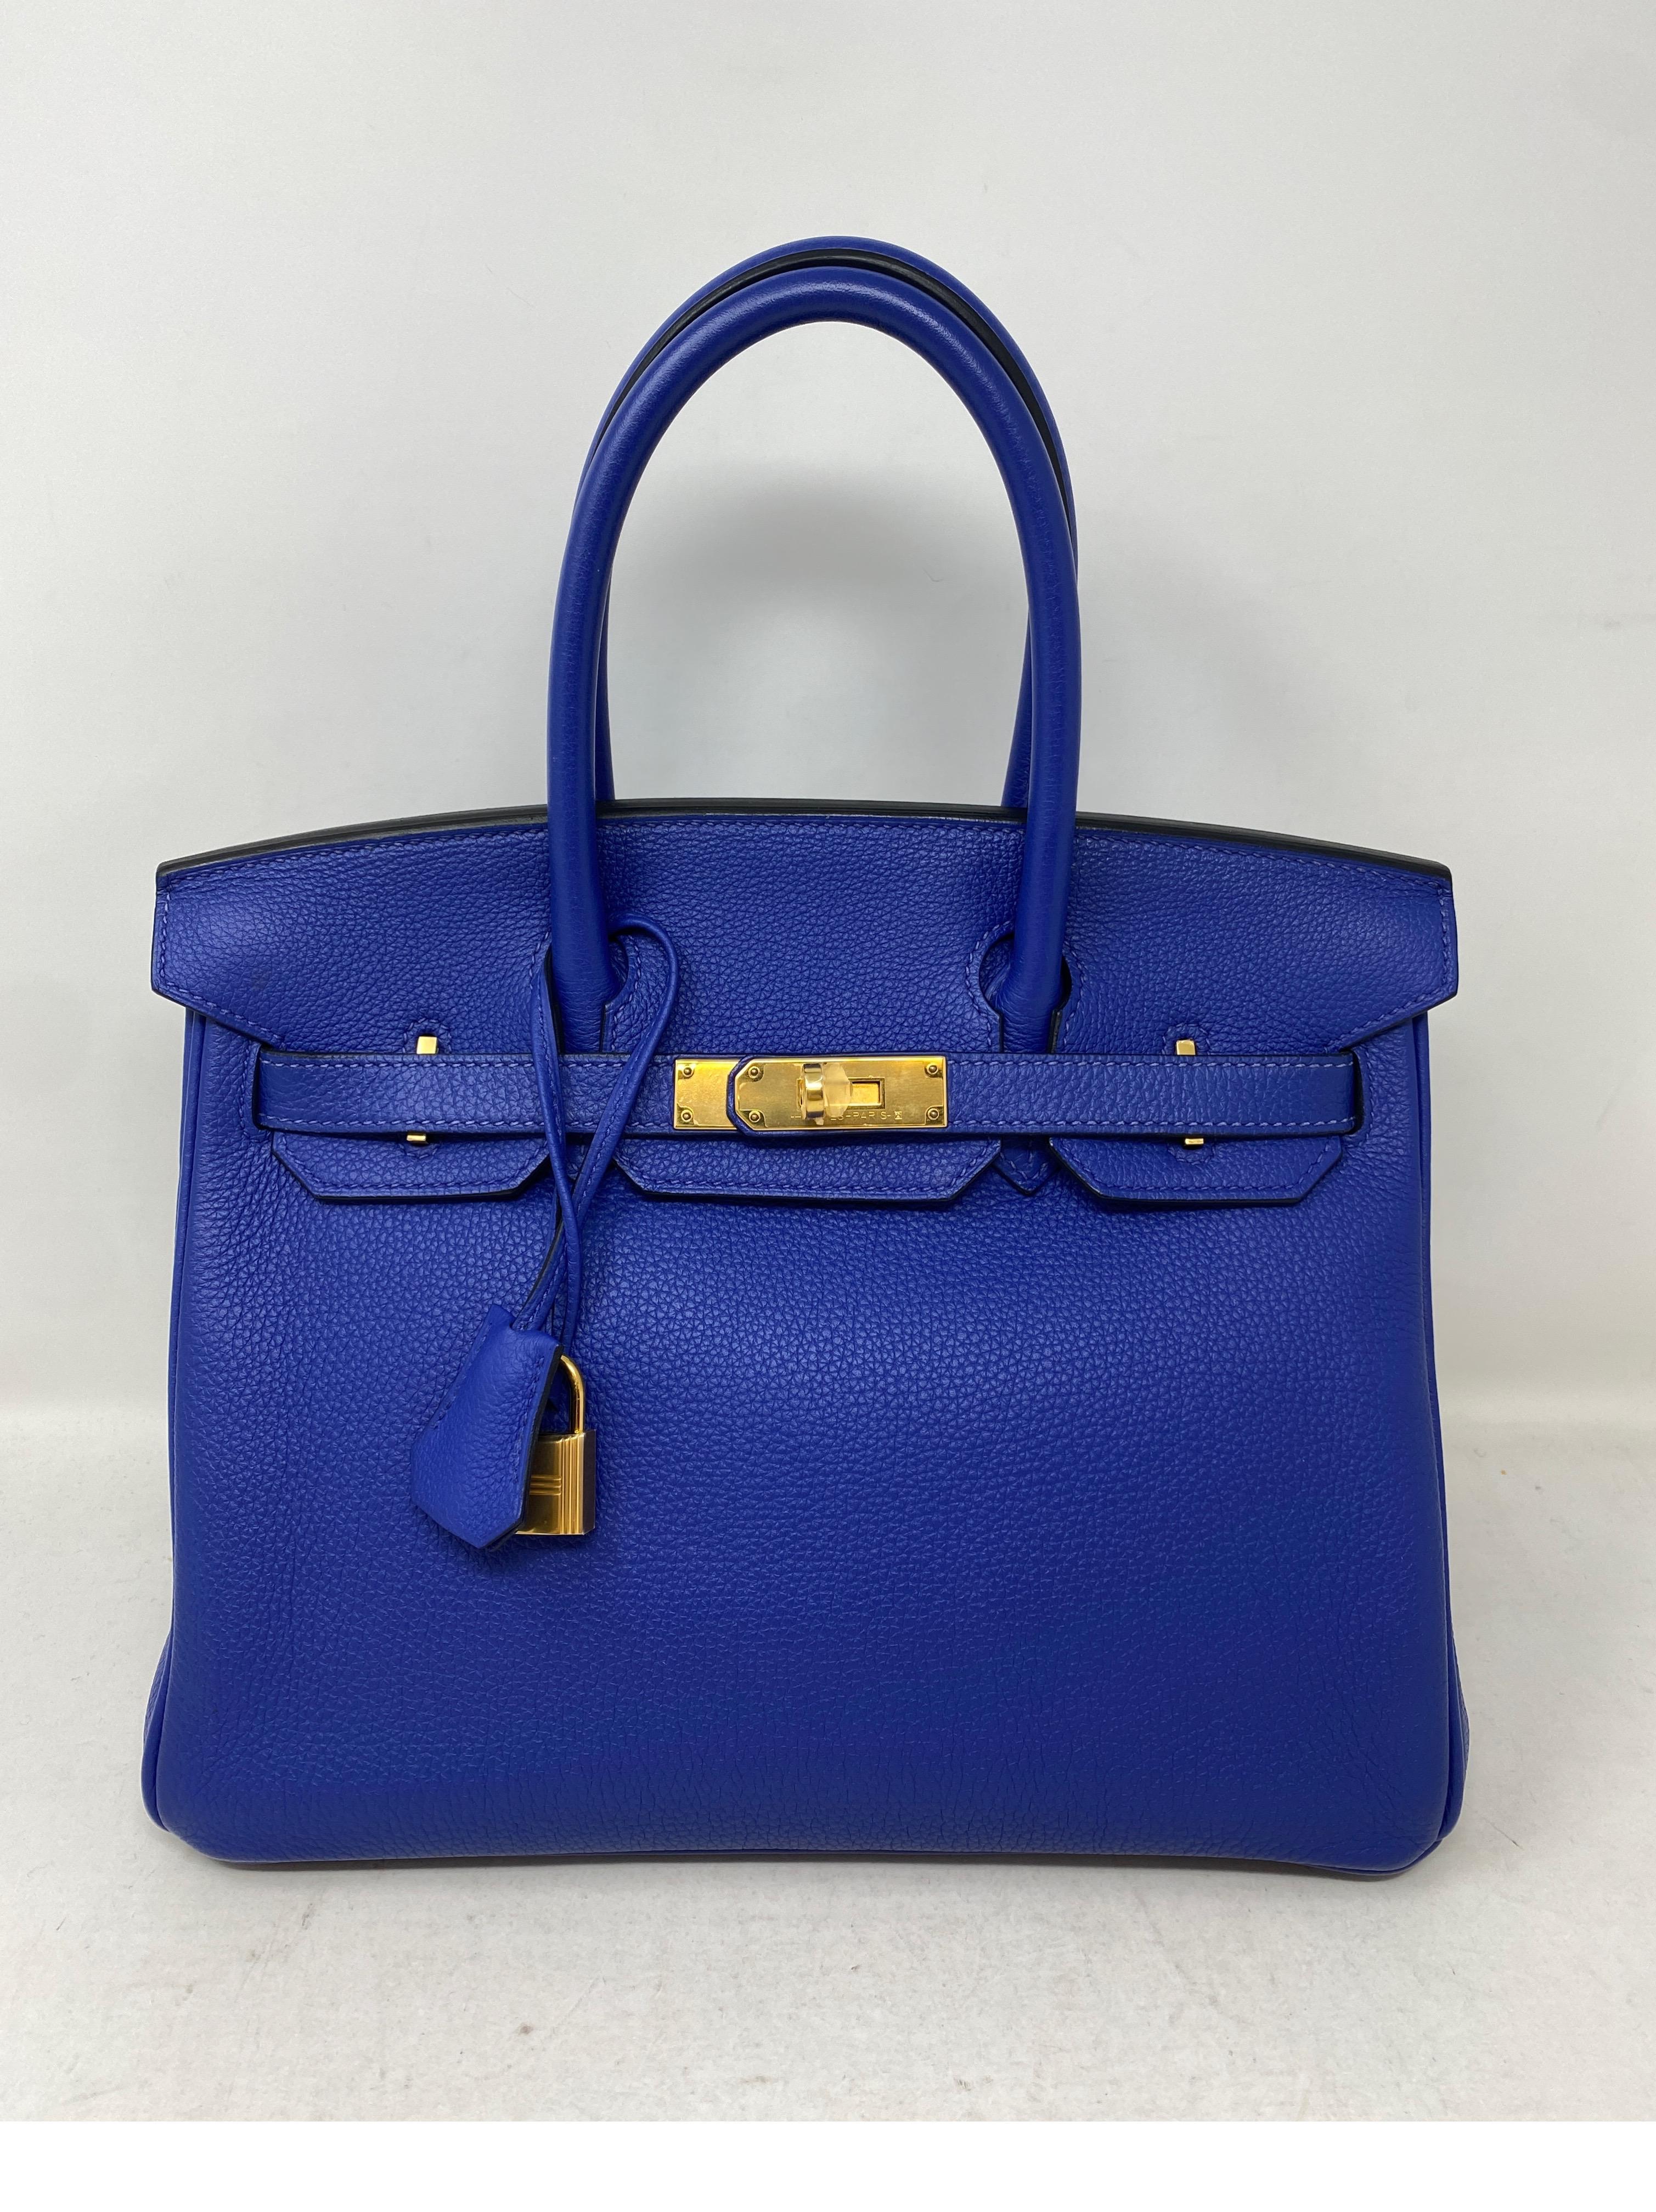 Hermes Blue Electrique Birkin 35 Bag. Electric blue color with gold hardware. Excellent condition. Looks like new. Gorgeous color and most wanted size 30 Birkin. Togo leather. Interior clean. Includes clochette, lock ,keys, and dust bag. Guaranteed